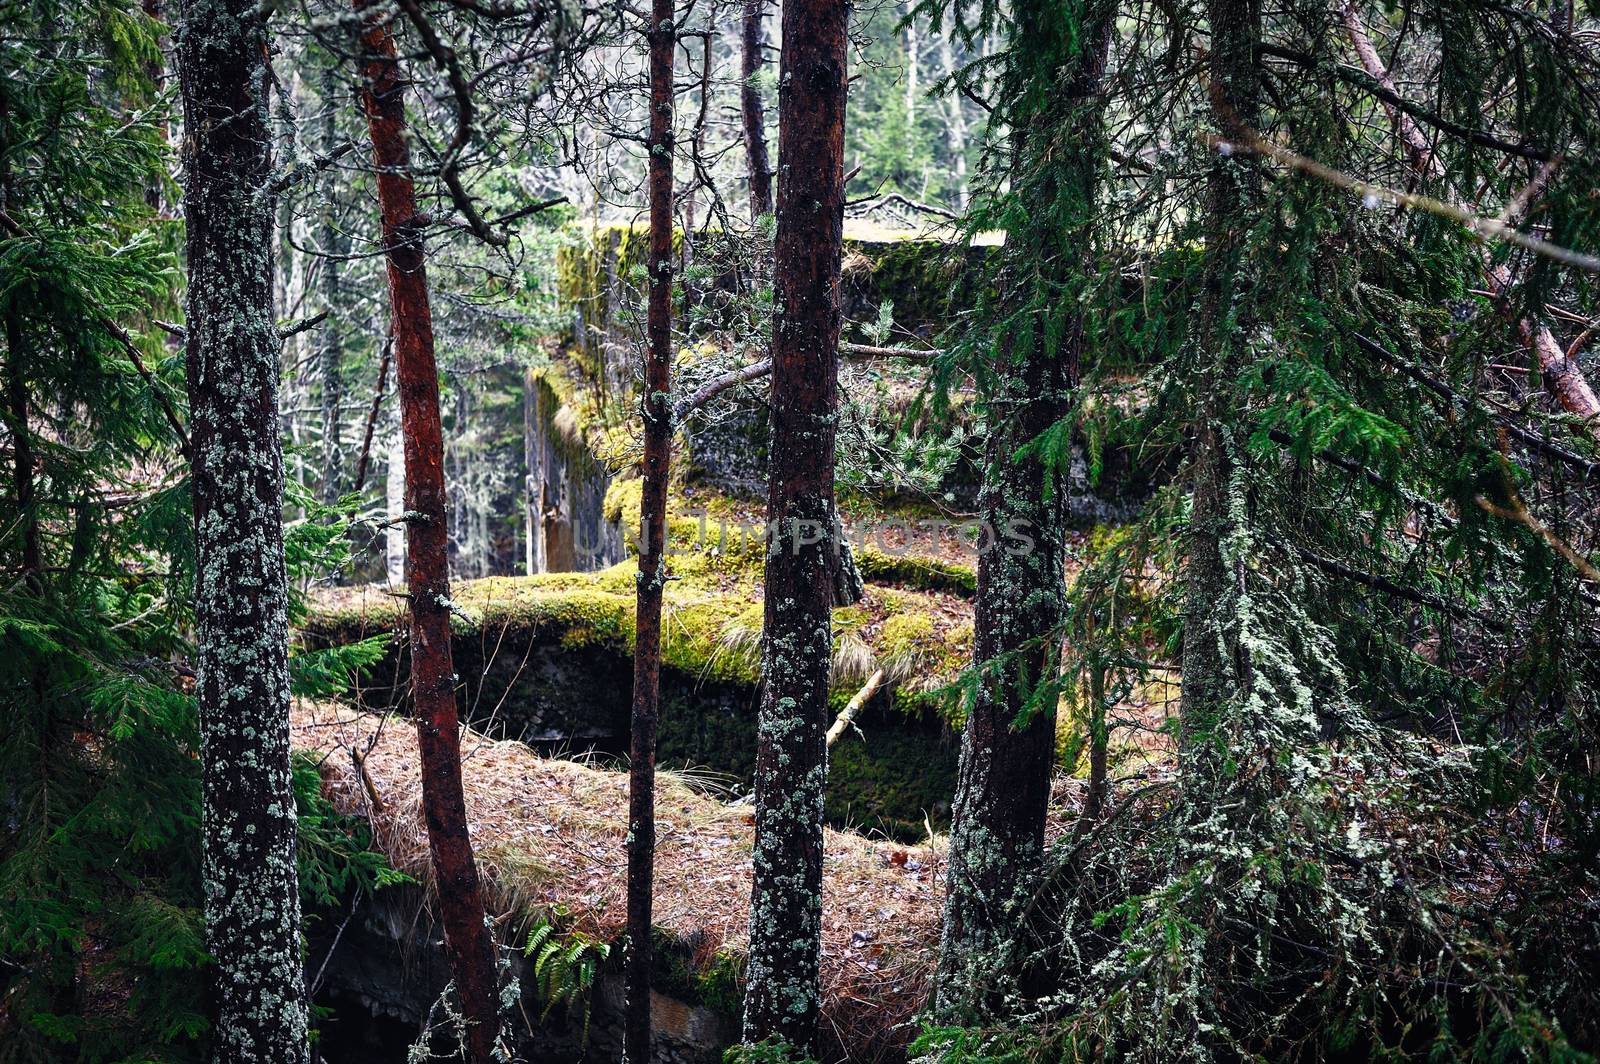 Moss on the old ruins in coniferous forest